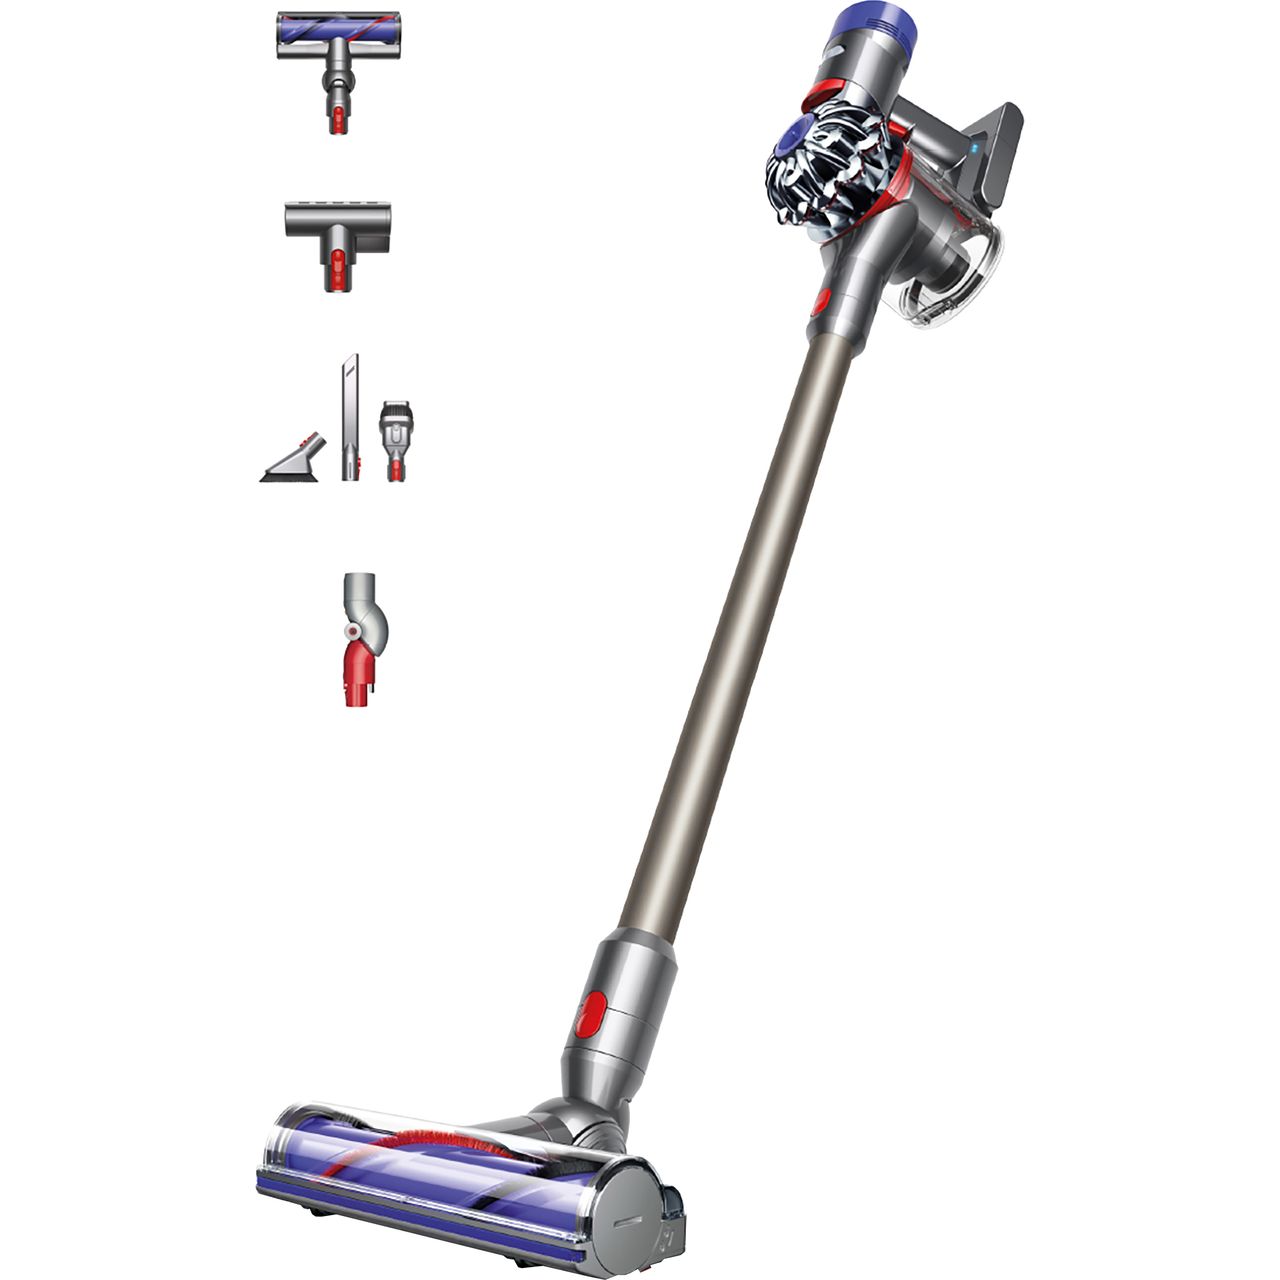 Dyson V8 Animal Cordless Vacuum Cleaner with up to 40 Minutes Run Time Review